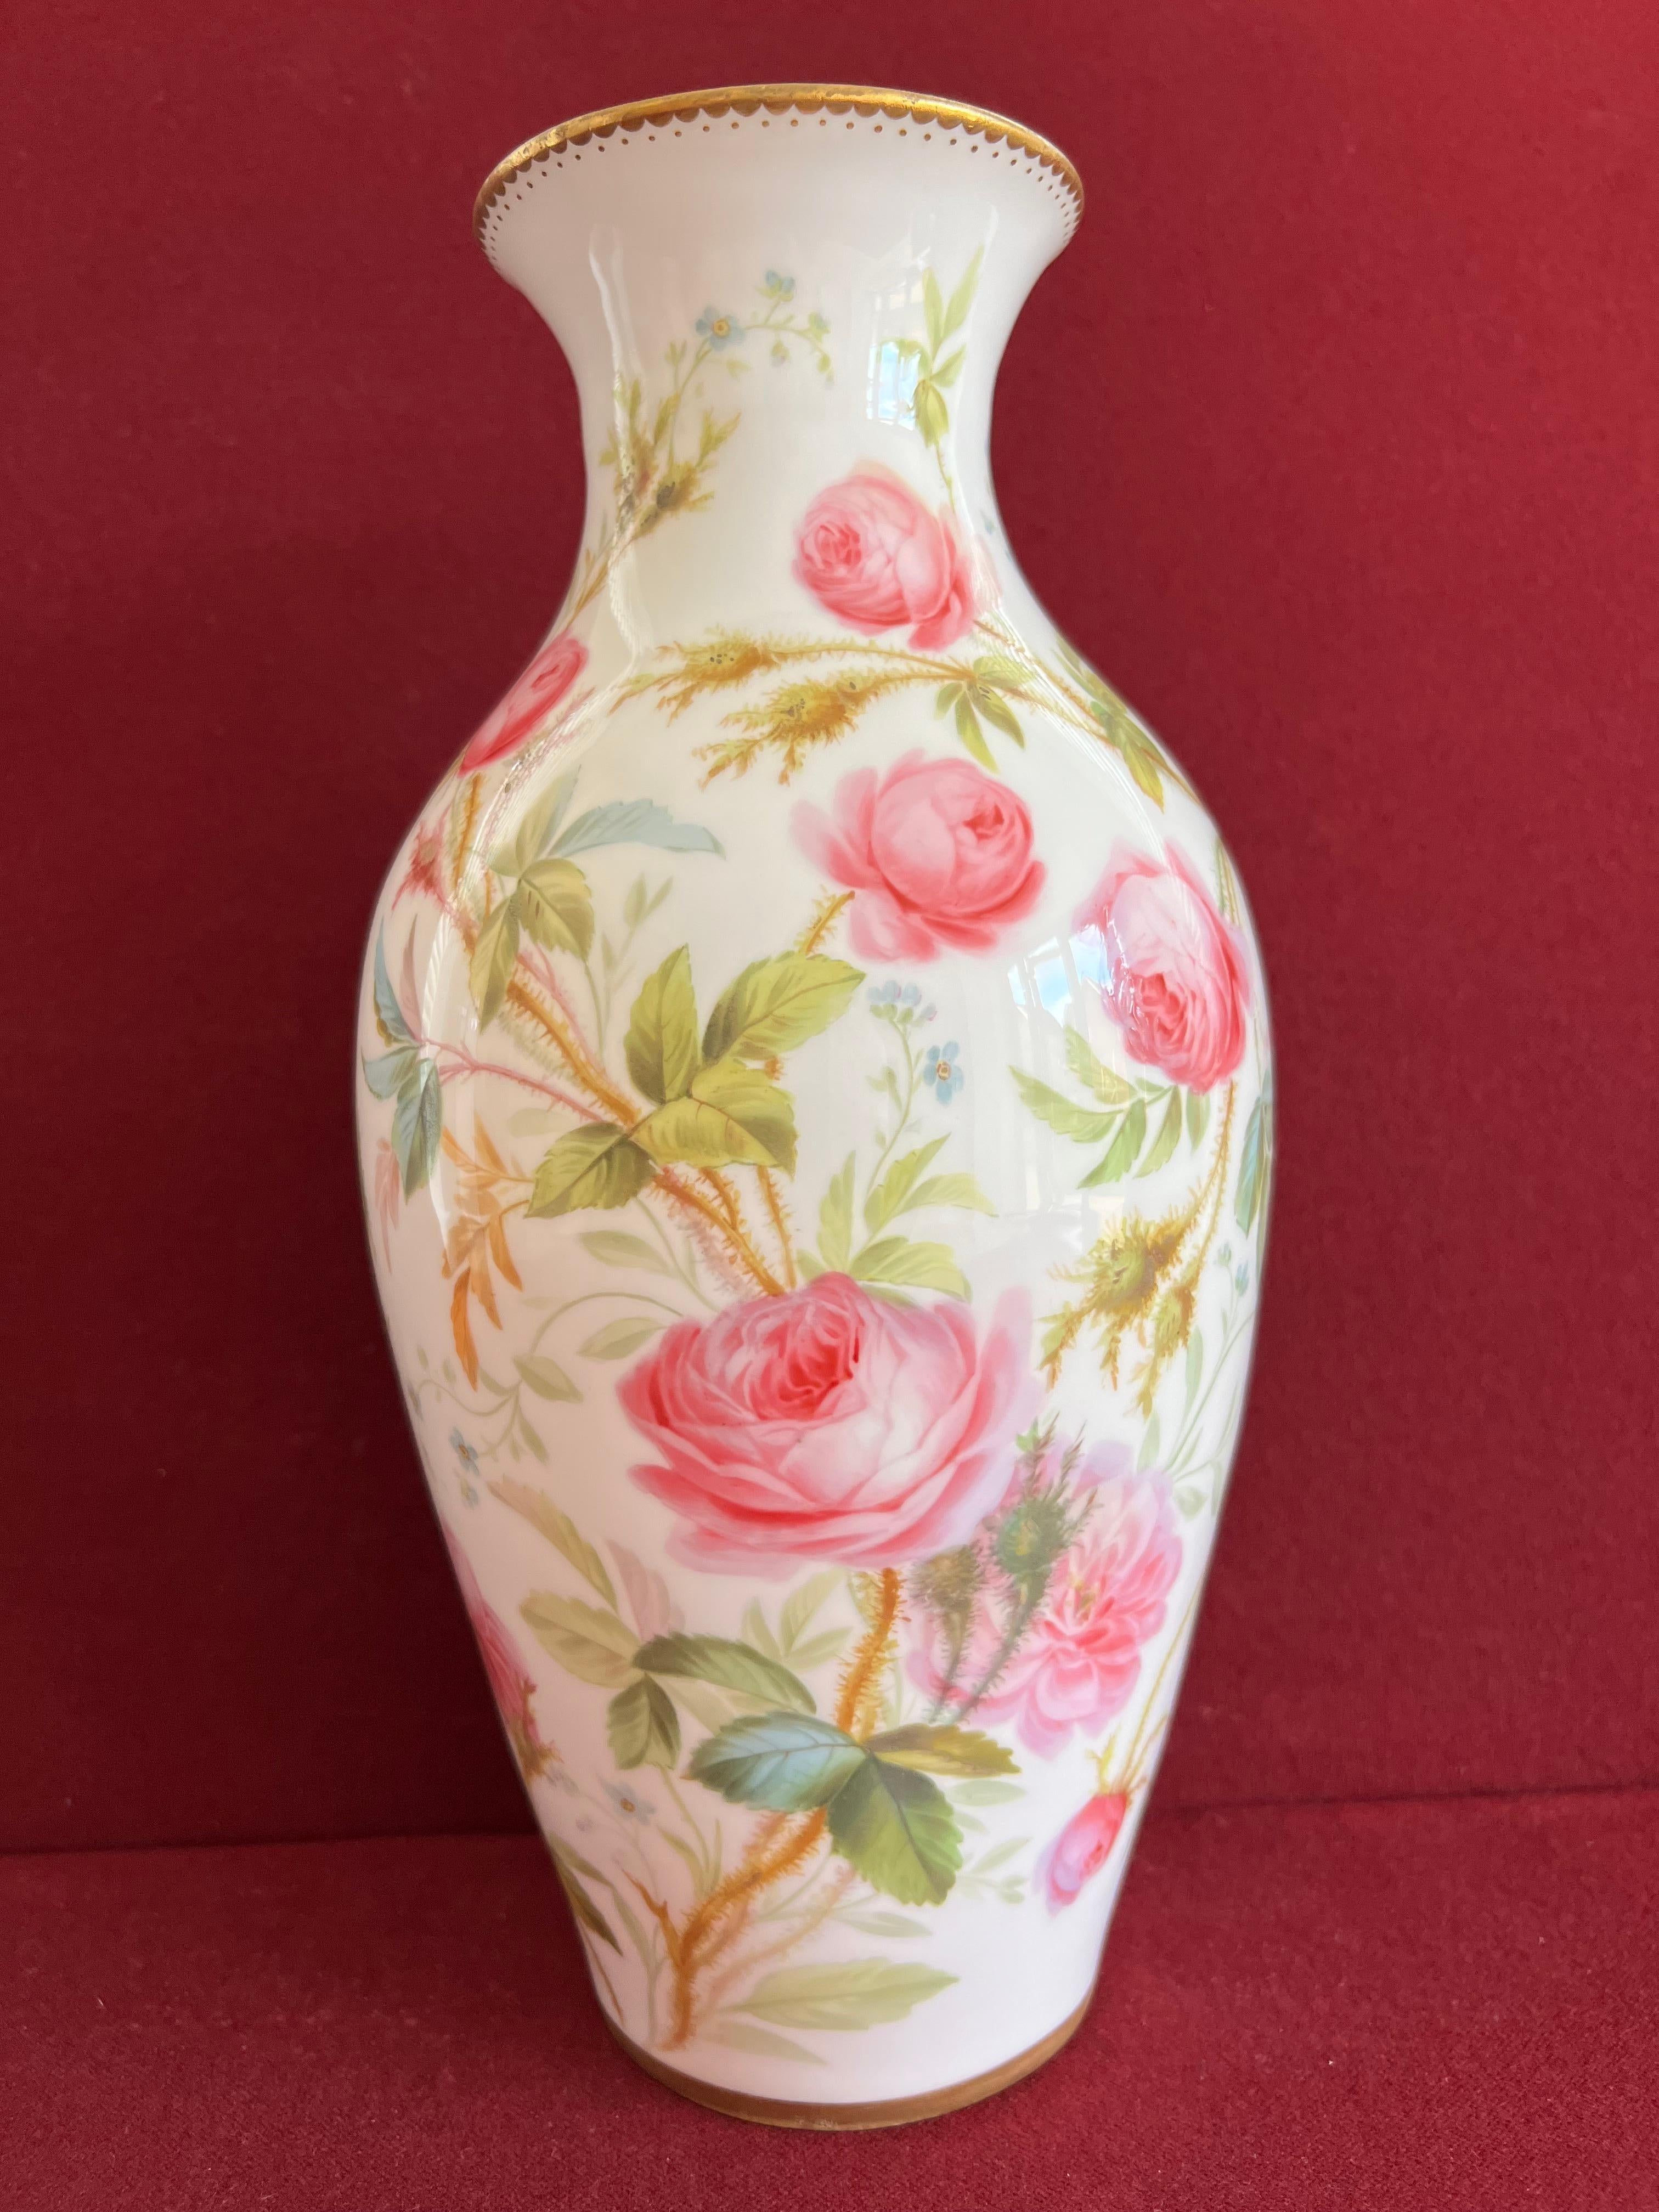 Wonderful Minton Bone China Vase Decorated by Jessie Smith C.1850 In Excellent Condition For Sale In Exeter, GB